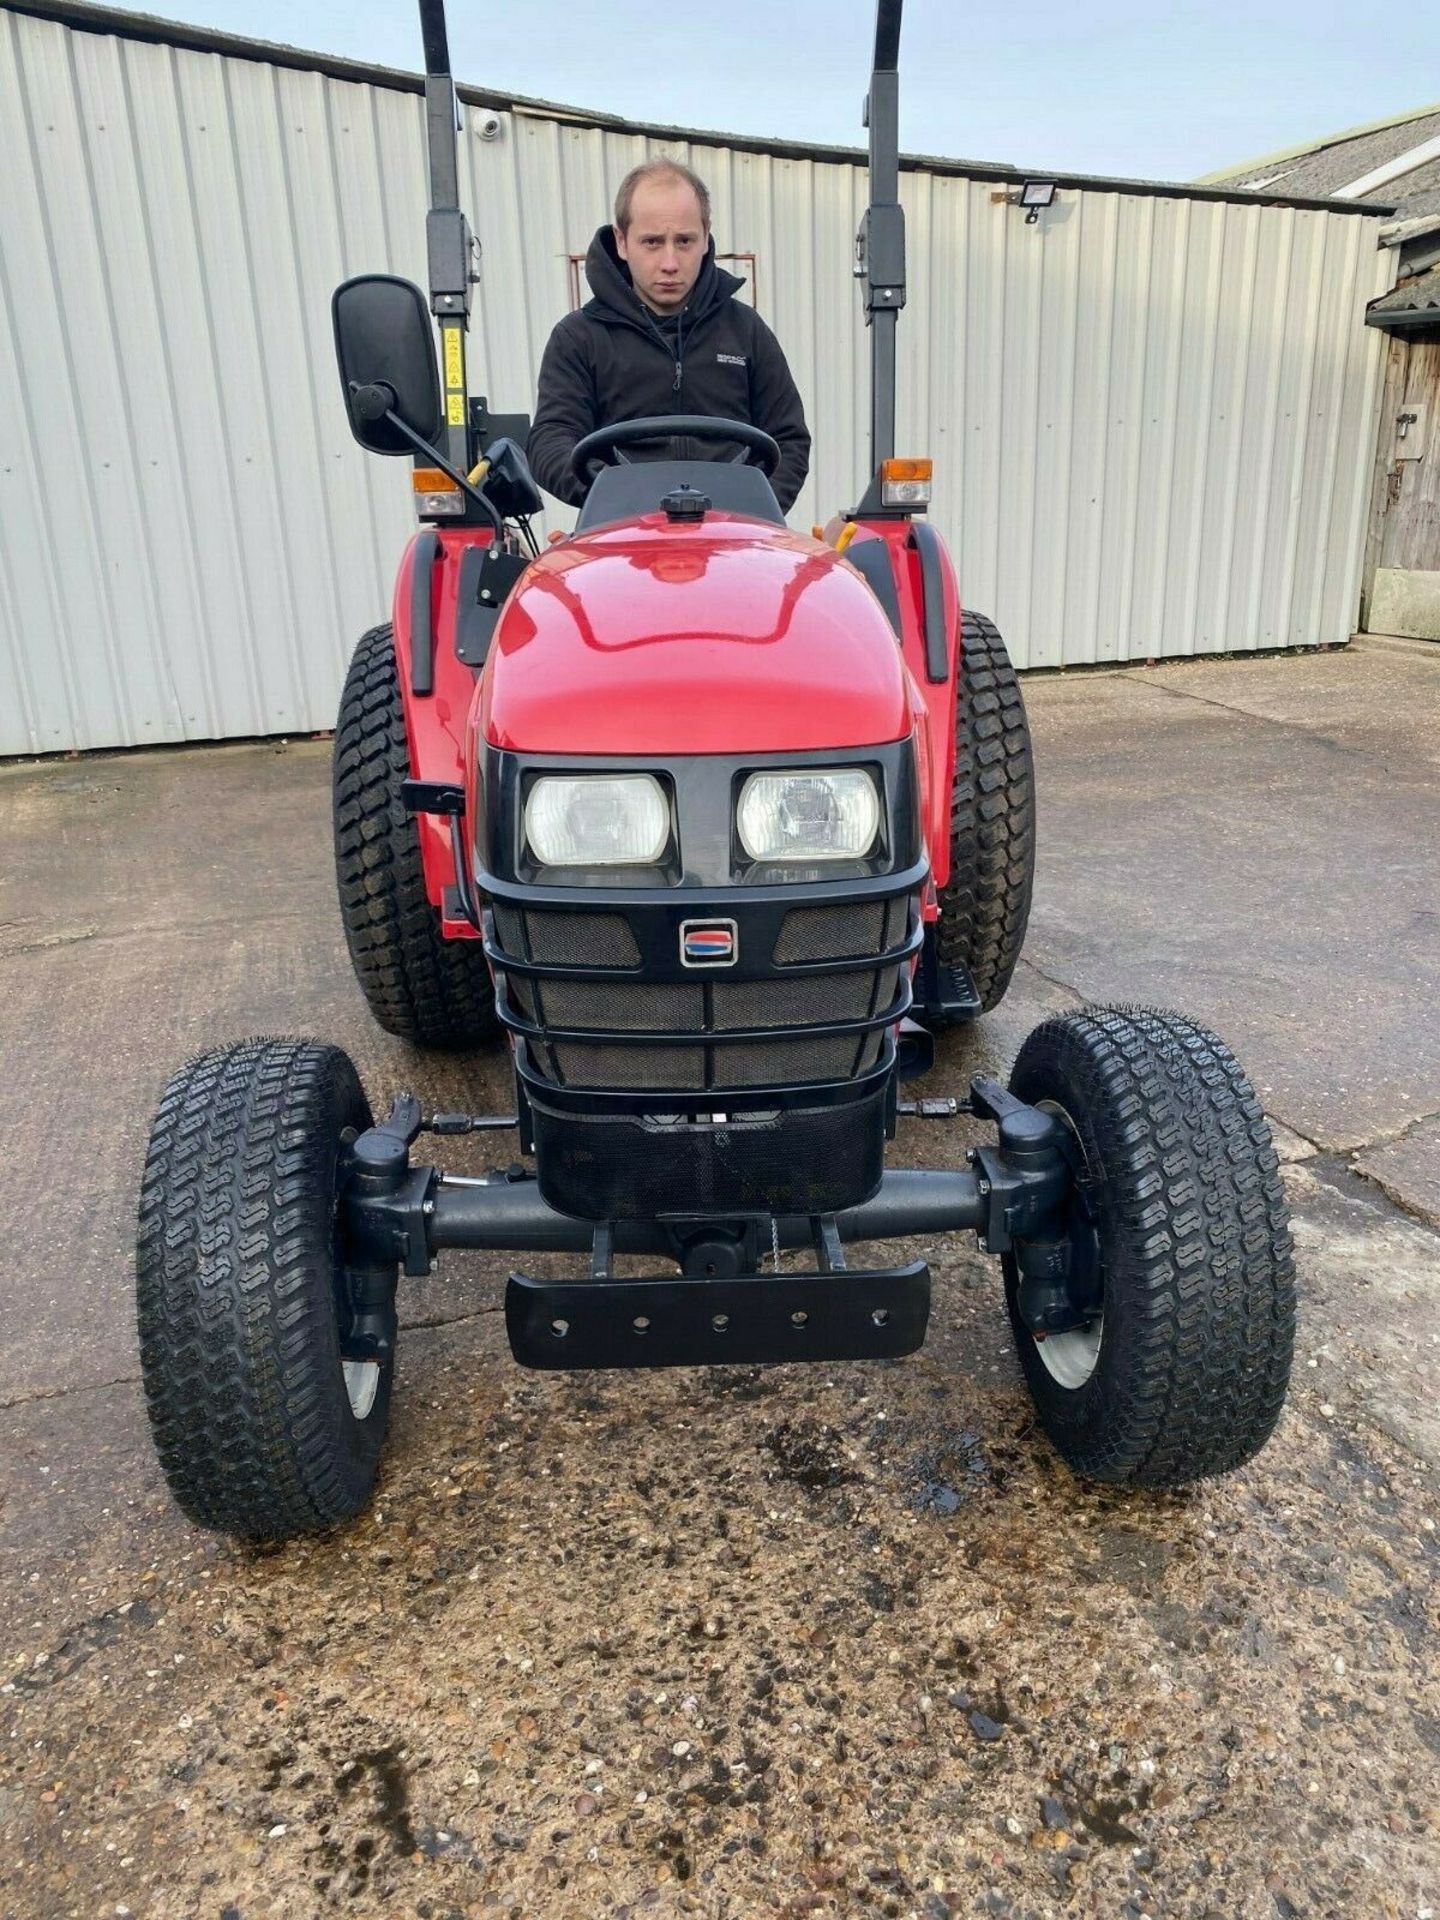 COMPACT TRACTOR SHIBAURA ST333, 33HP, 4 WHEEL DRIVE, YEAR 2012, ONLY 685 HOURS GENUINE FROM NEW - Image 4 of 9